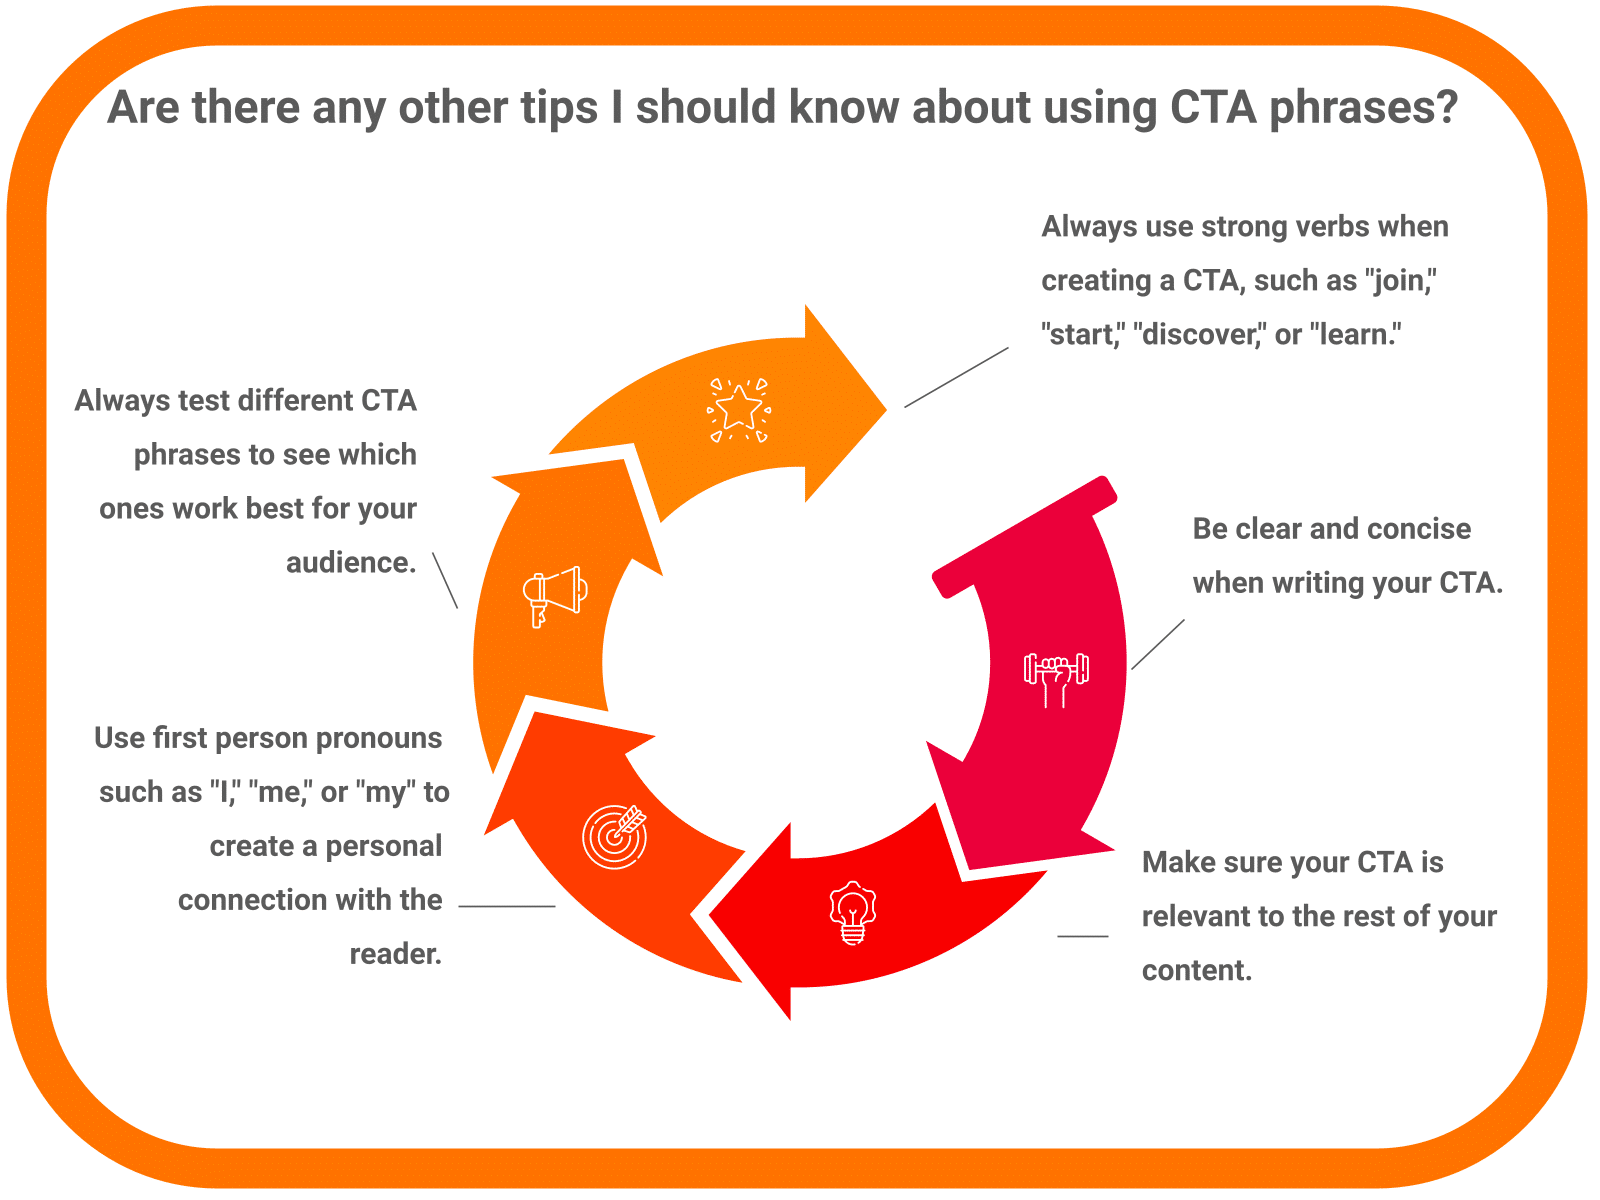 Are there any other tips I should know about using CTA phrases?